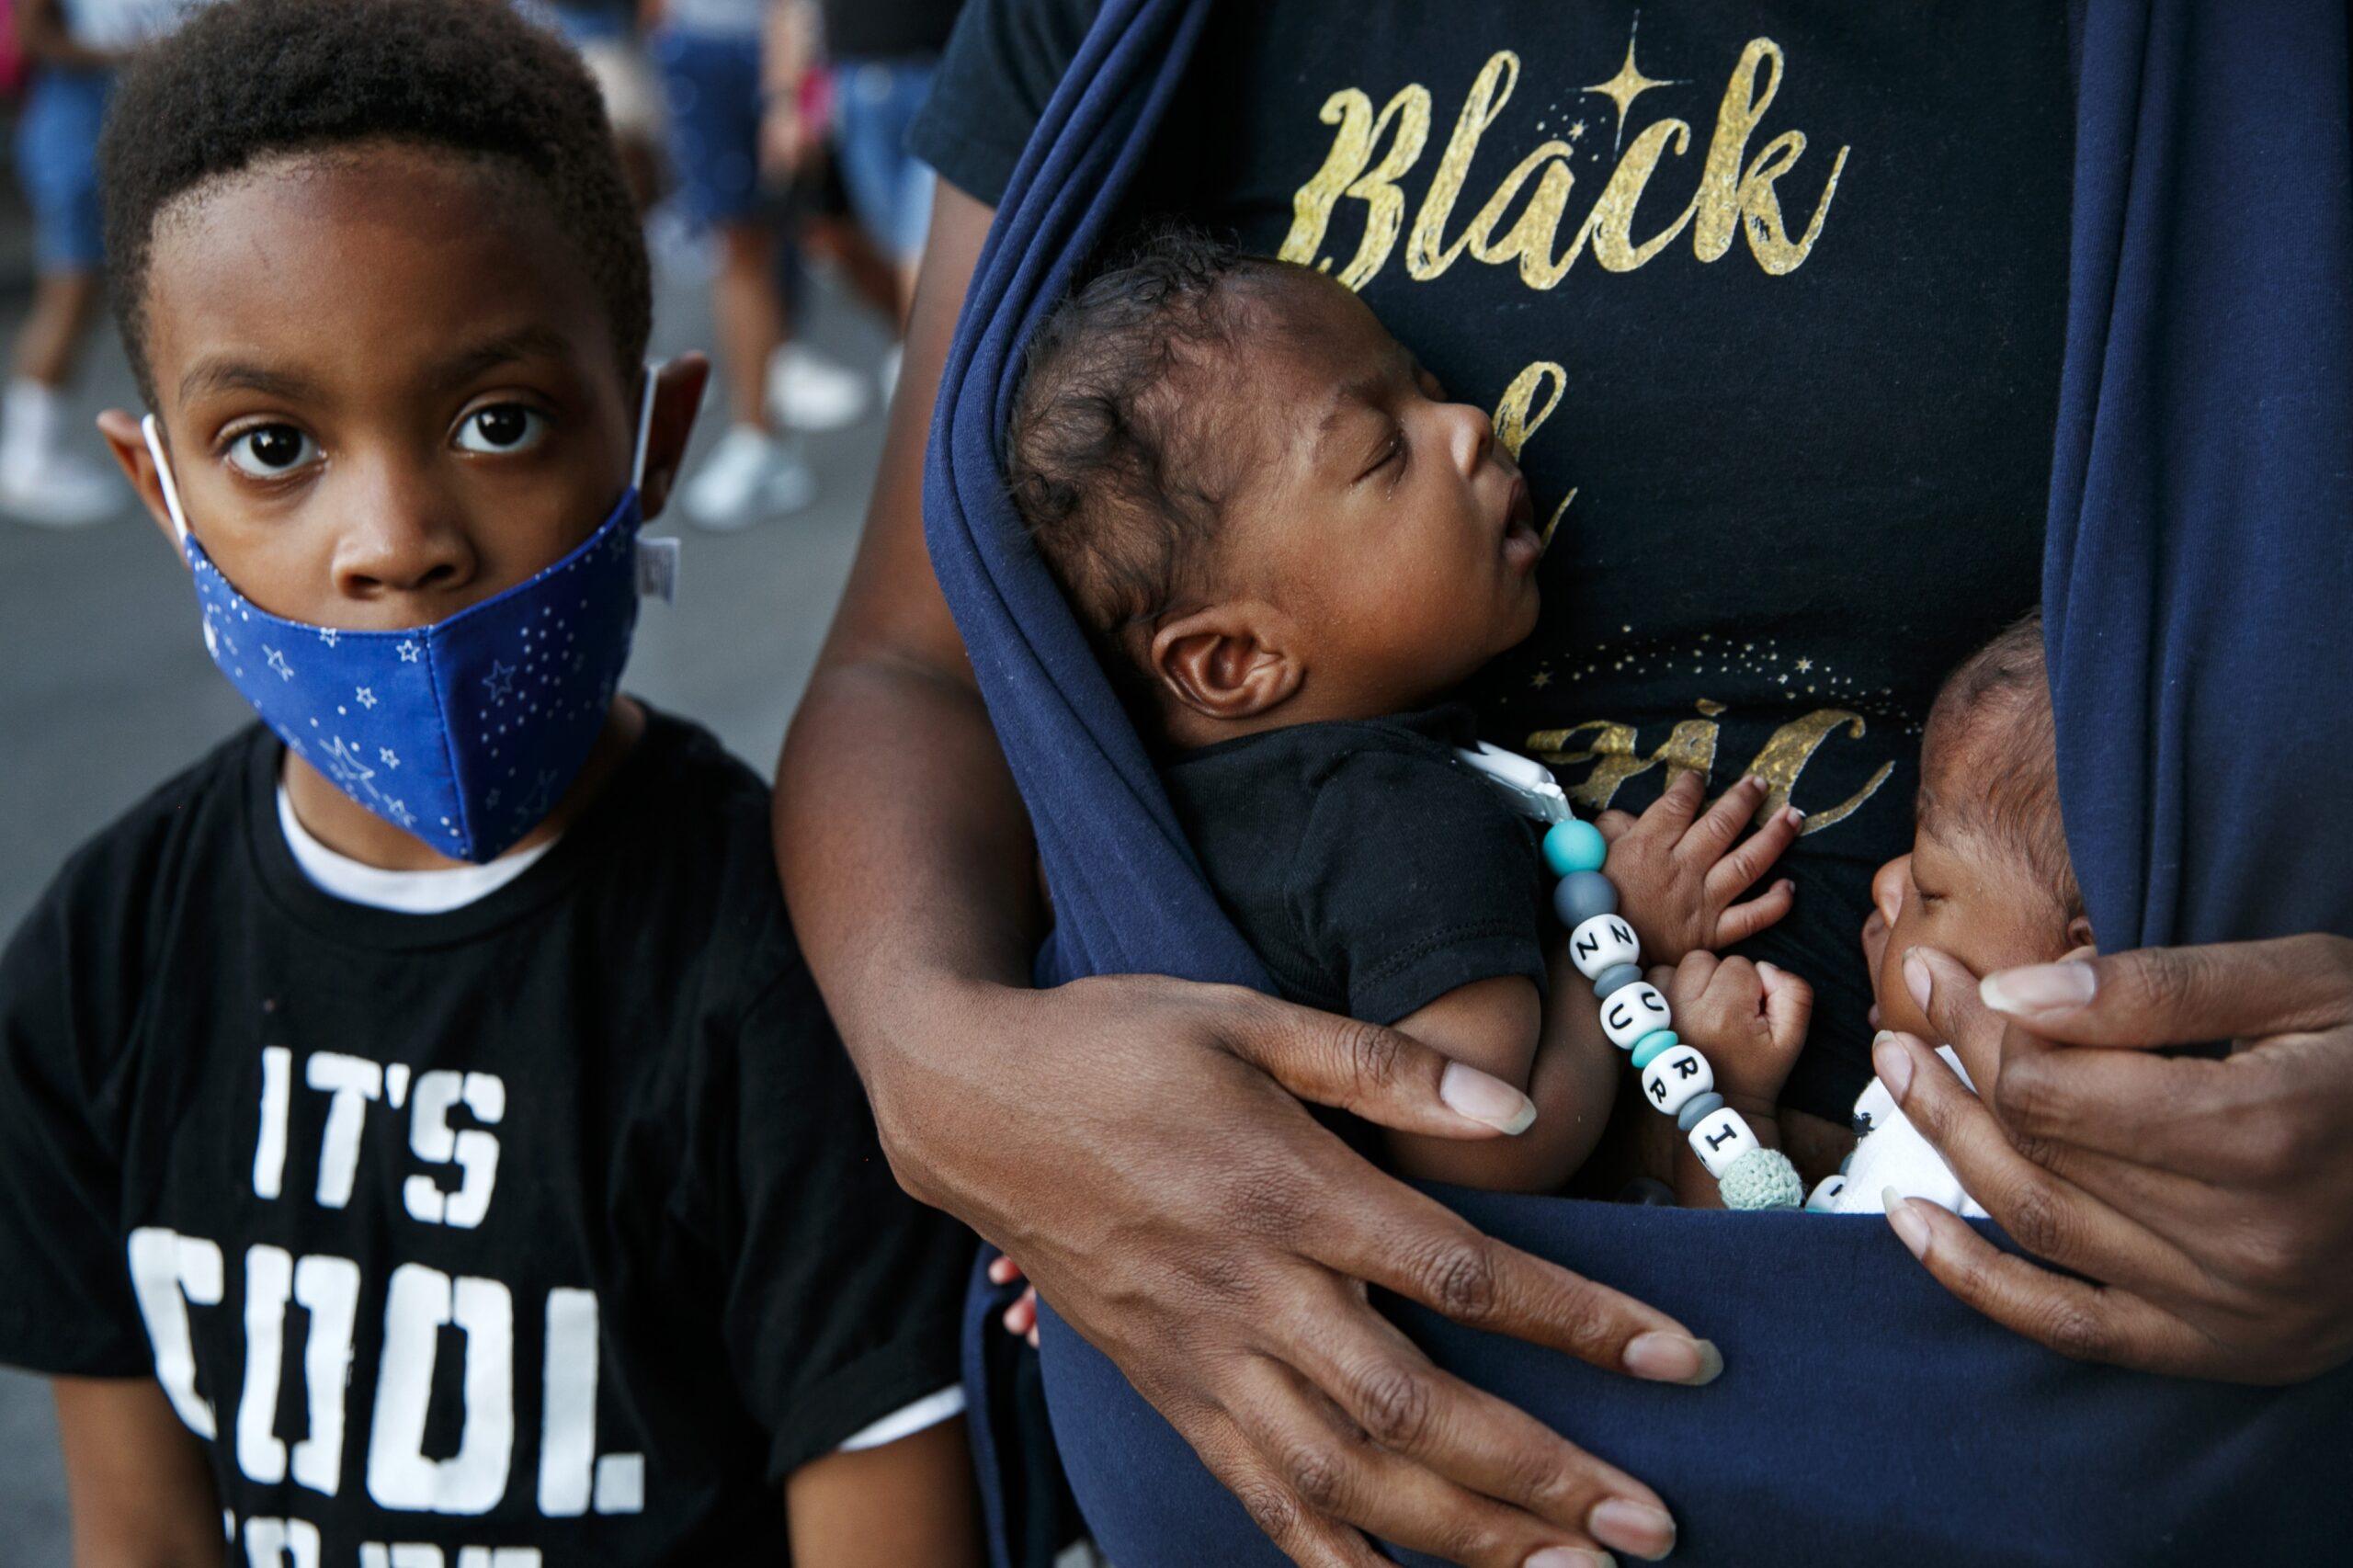 Xavier Simmorins stands next to his brothers, 8-week-old twins Zuri and Zakai Simmorins, as they are held by their mother Samara Simmorins, during a protest